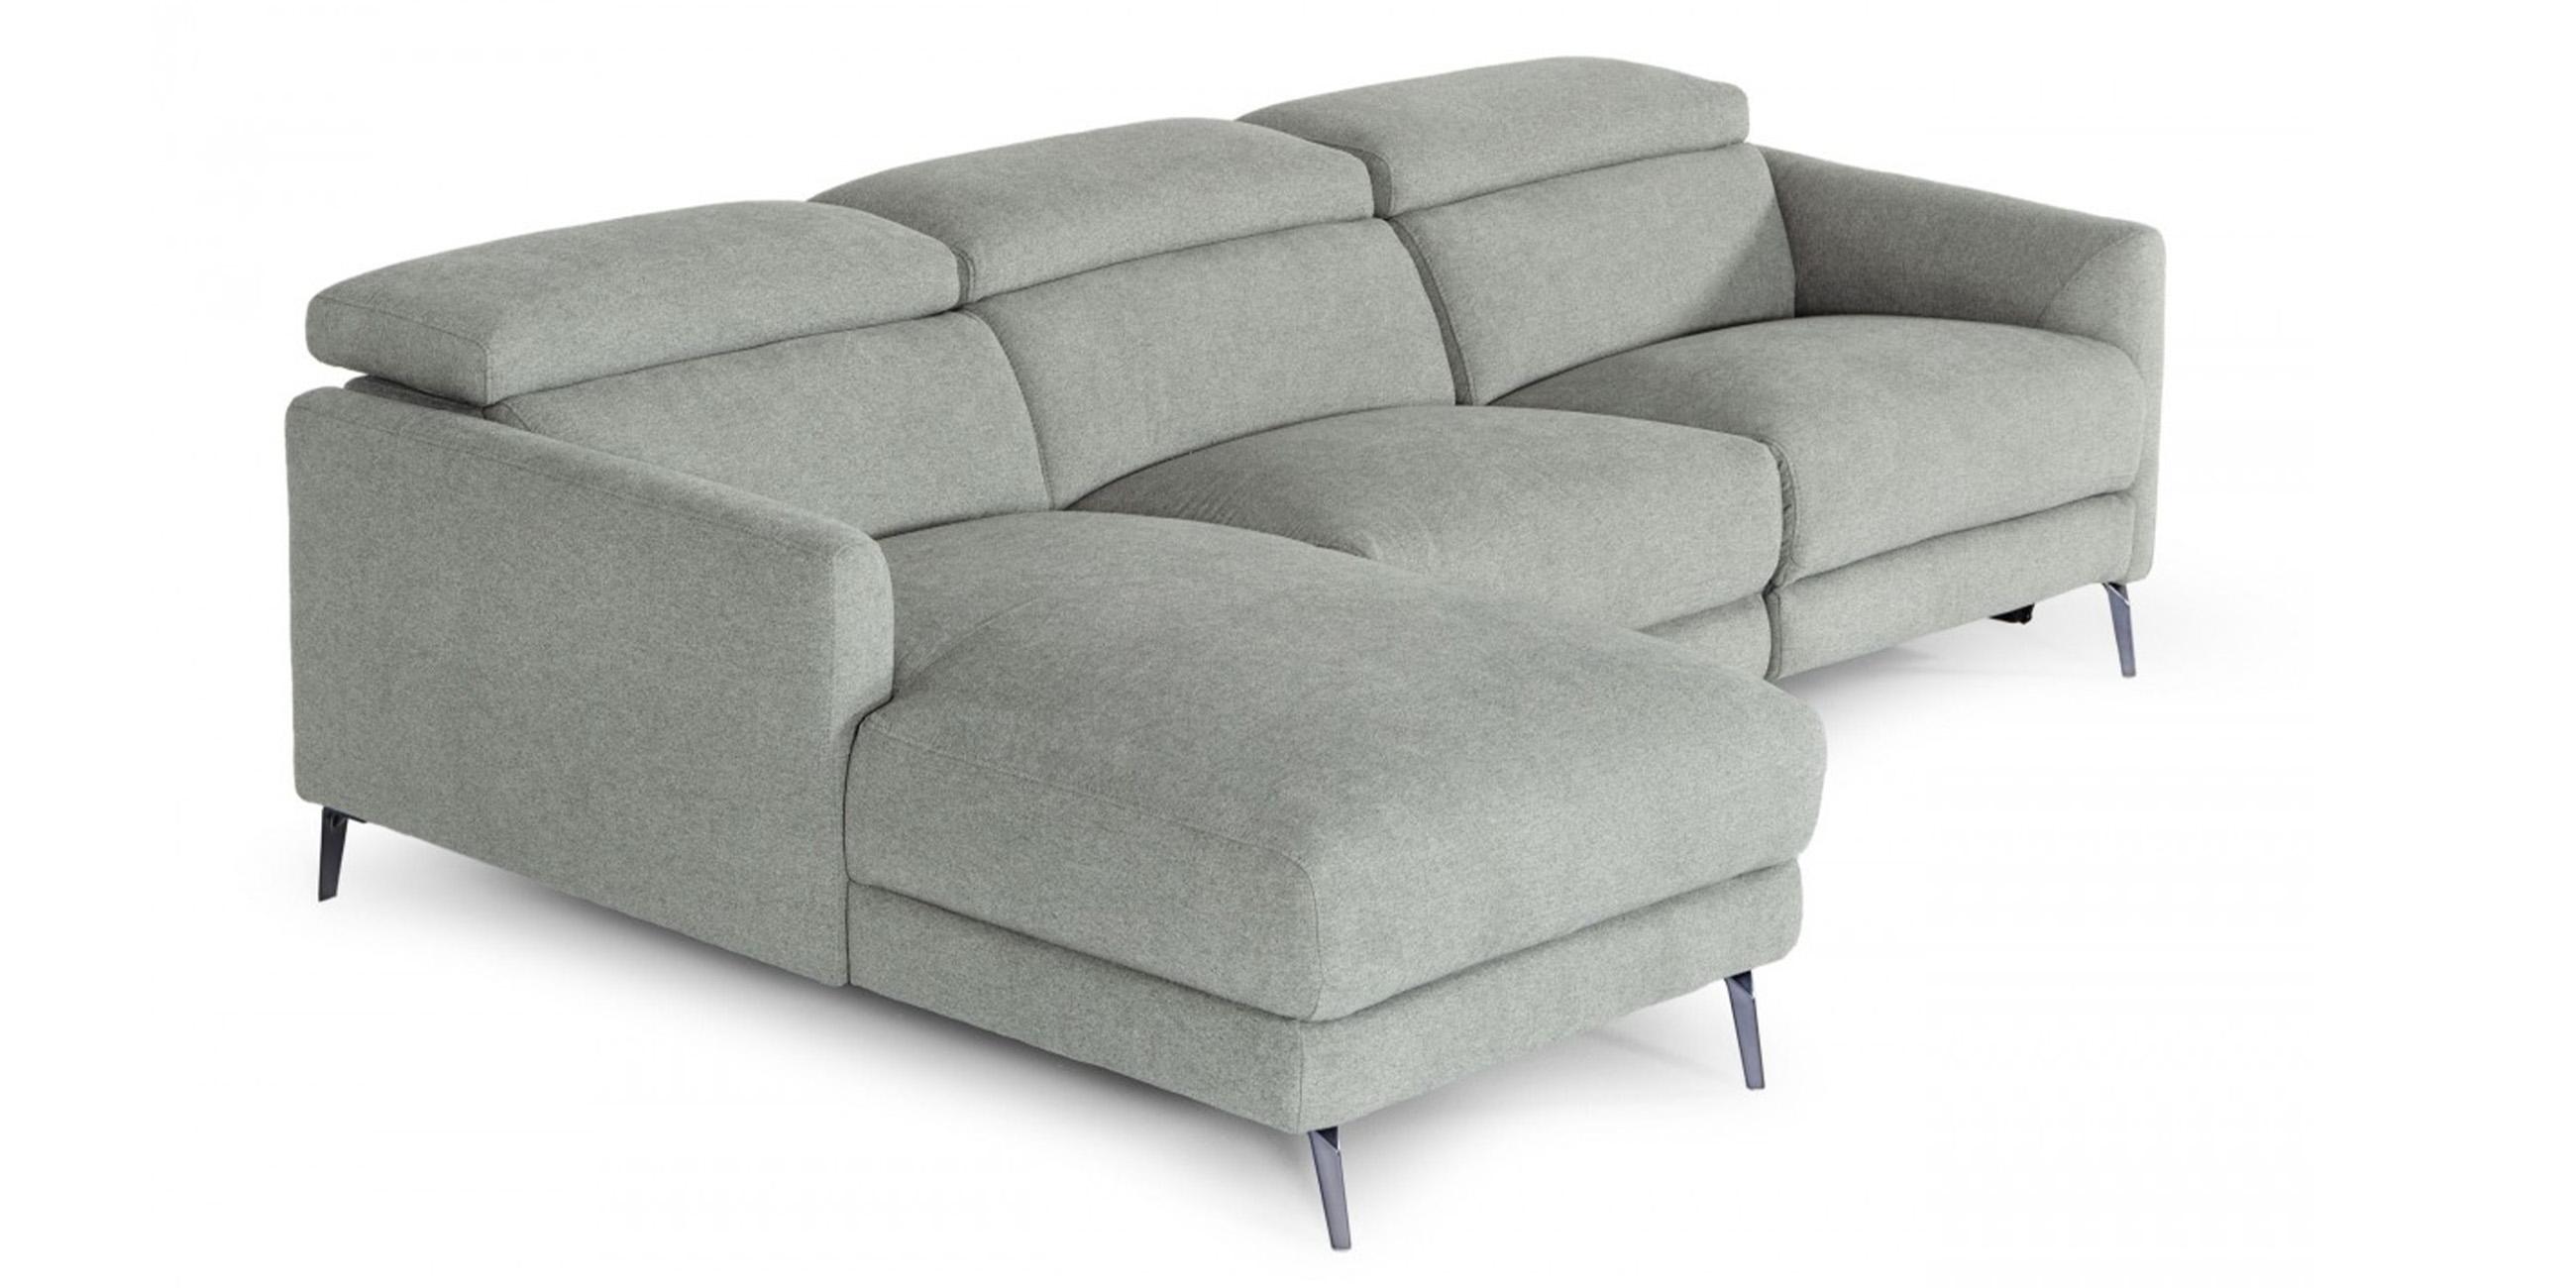 Contemporary, Modern Sectional Sofa VGKMKM.5000-LF VGKMKM.5000-LF in Gray Fabric